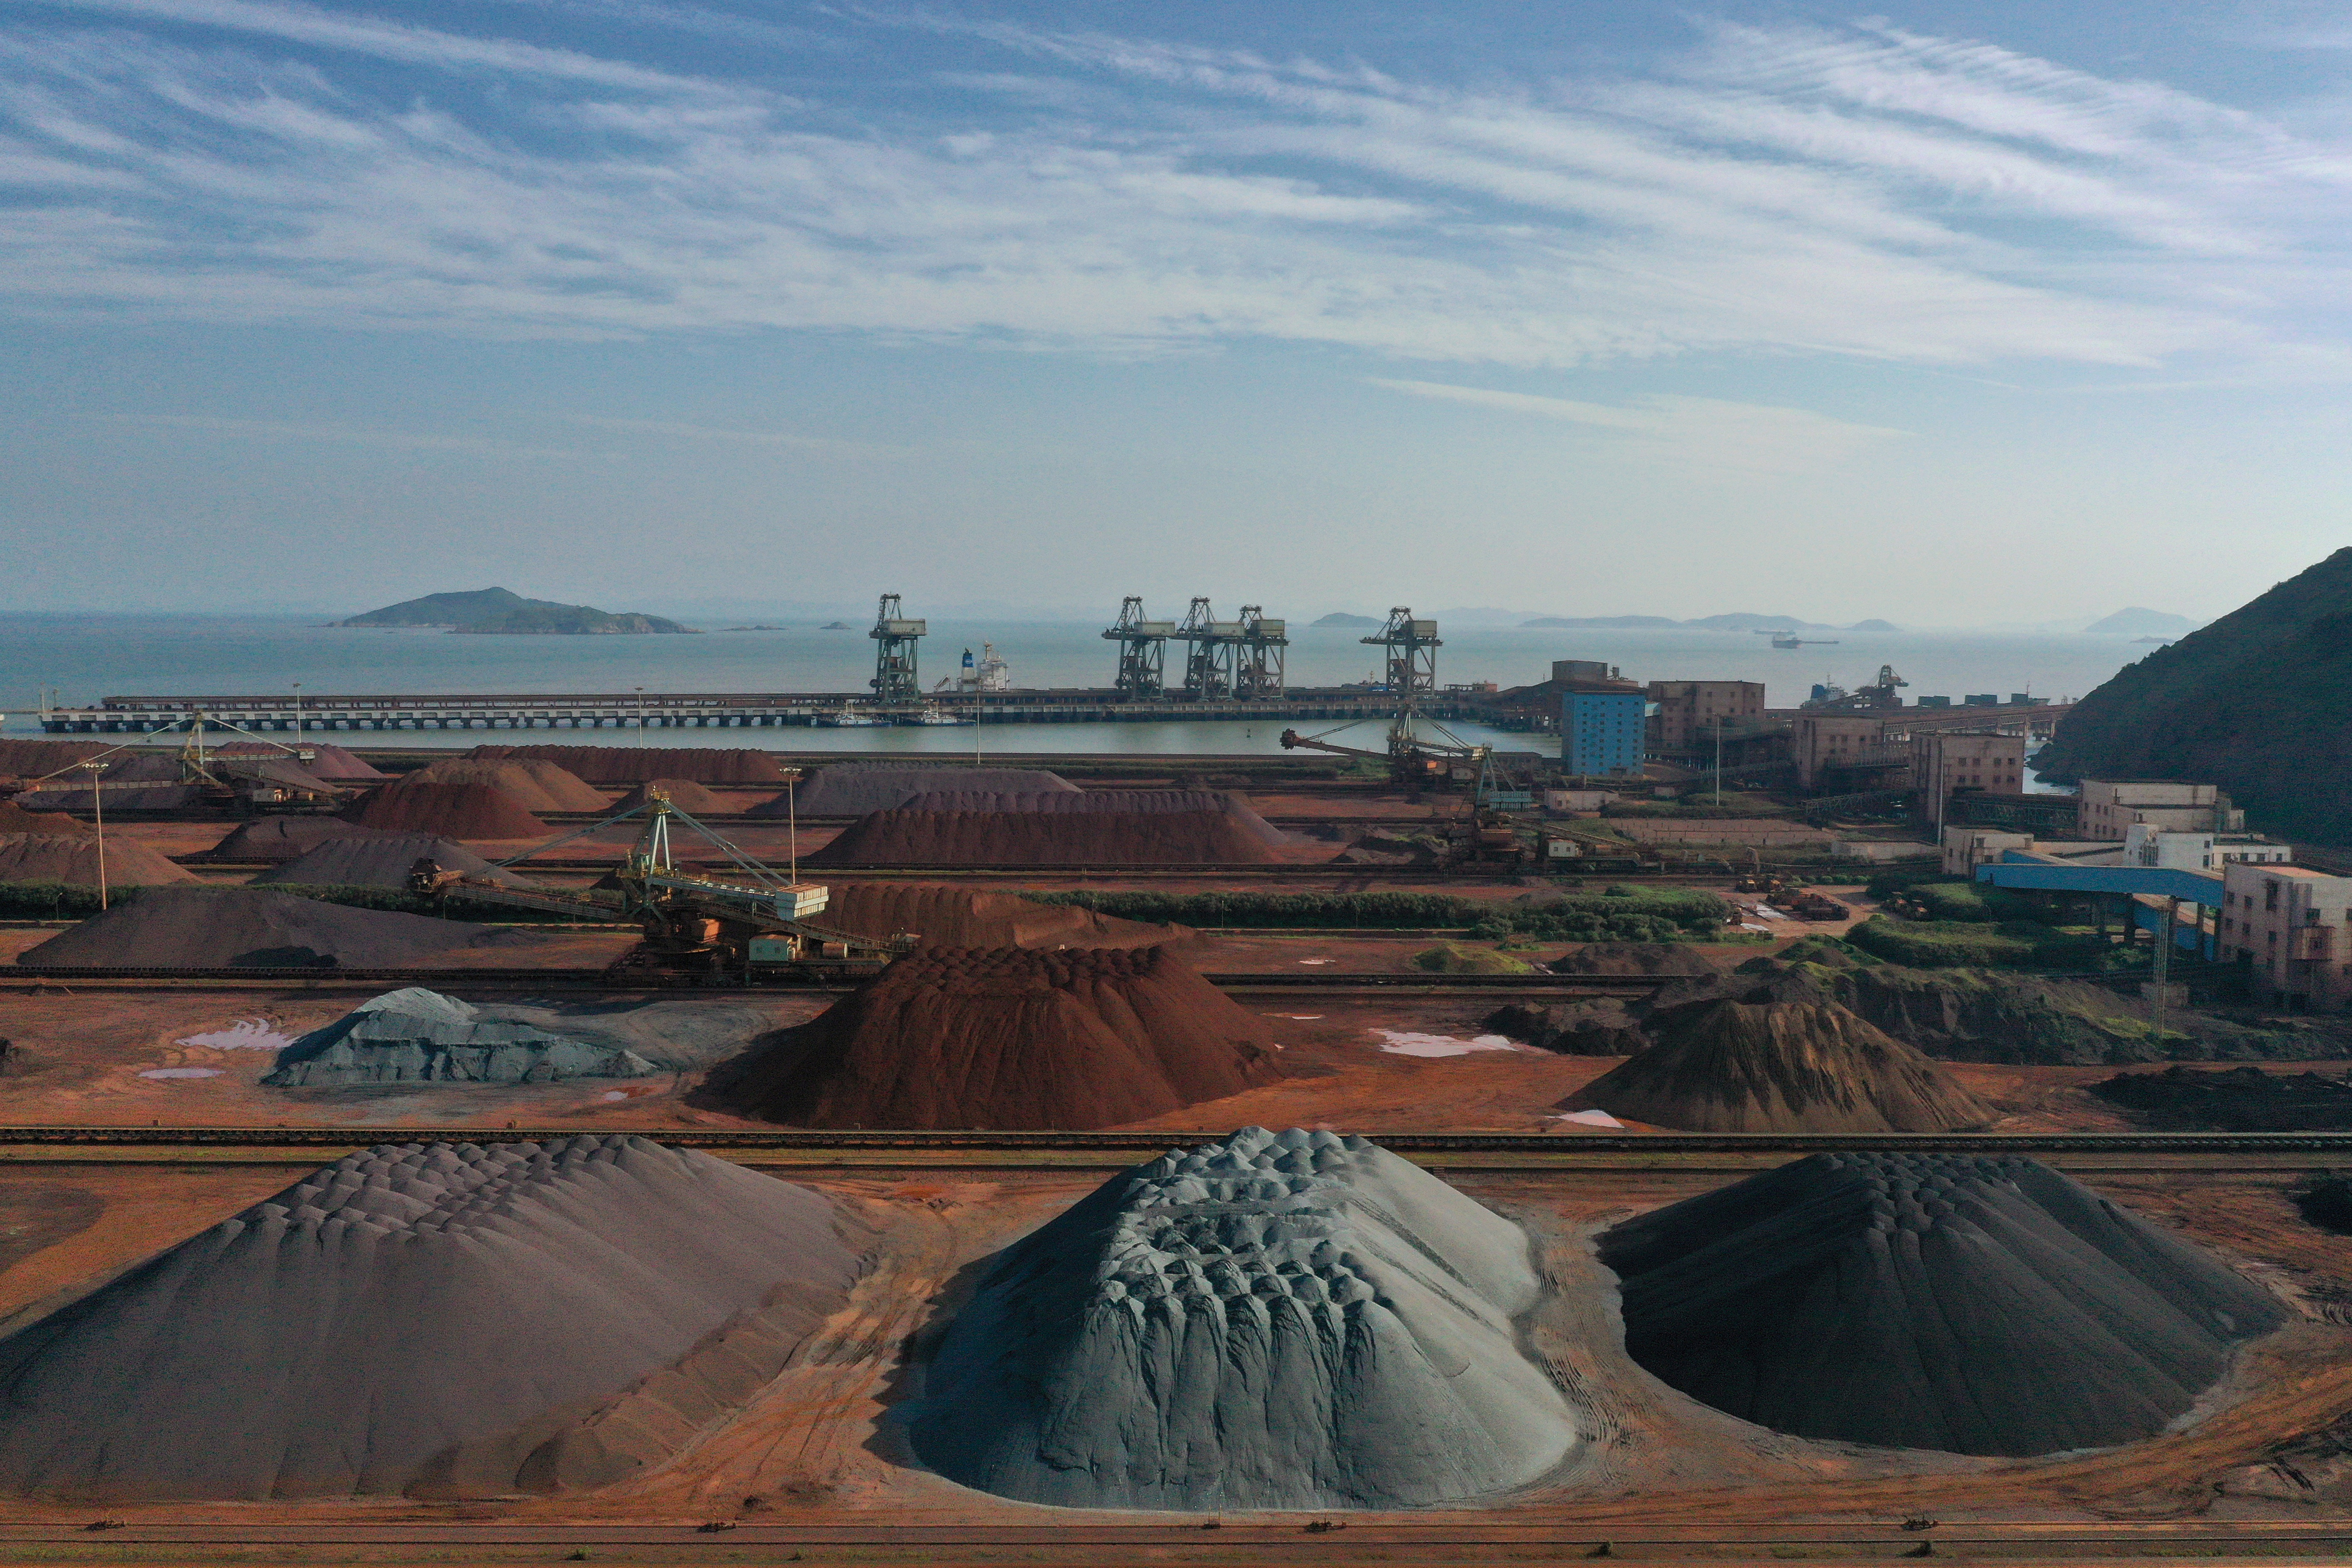 Piles of imported iron ore are seen at a port in Zhoushan, Zhejiang province, China May 9, 2019. REUTERS/Stringer 